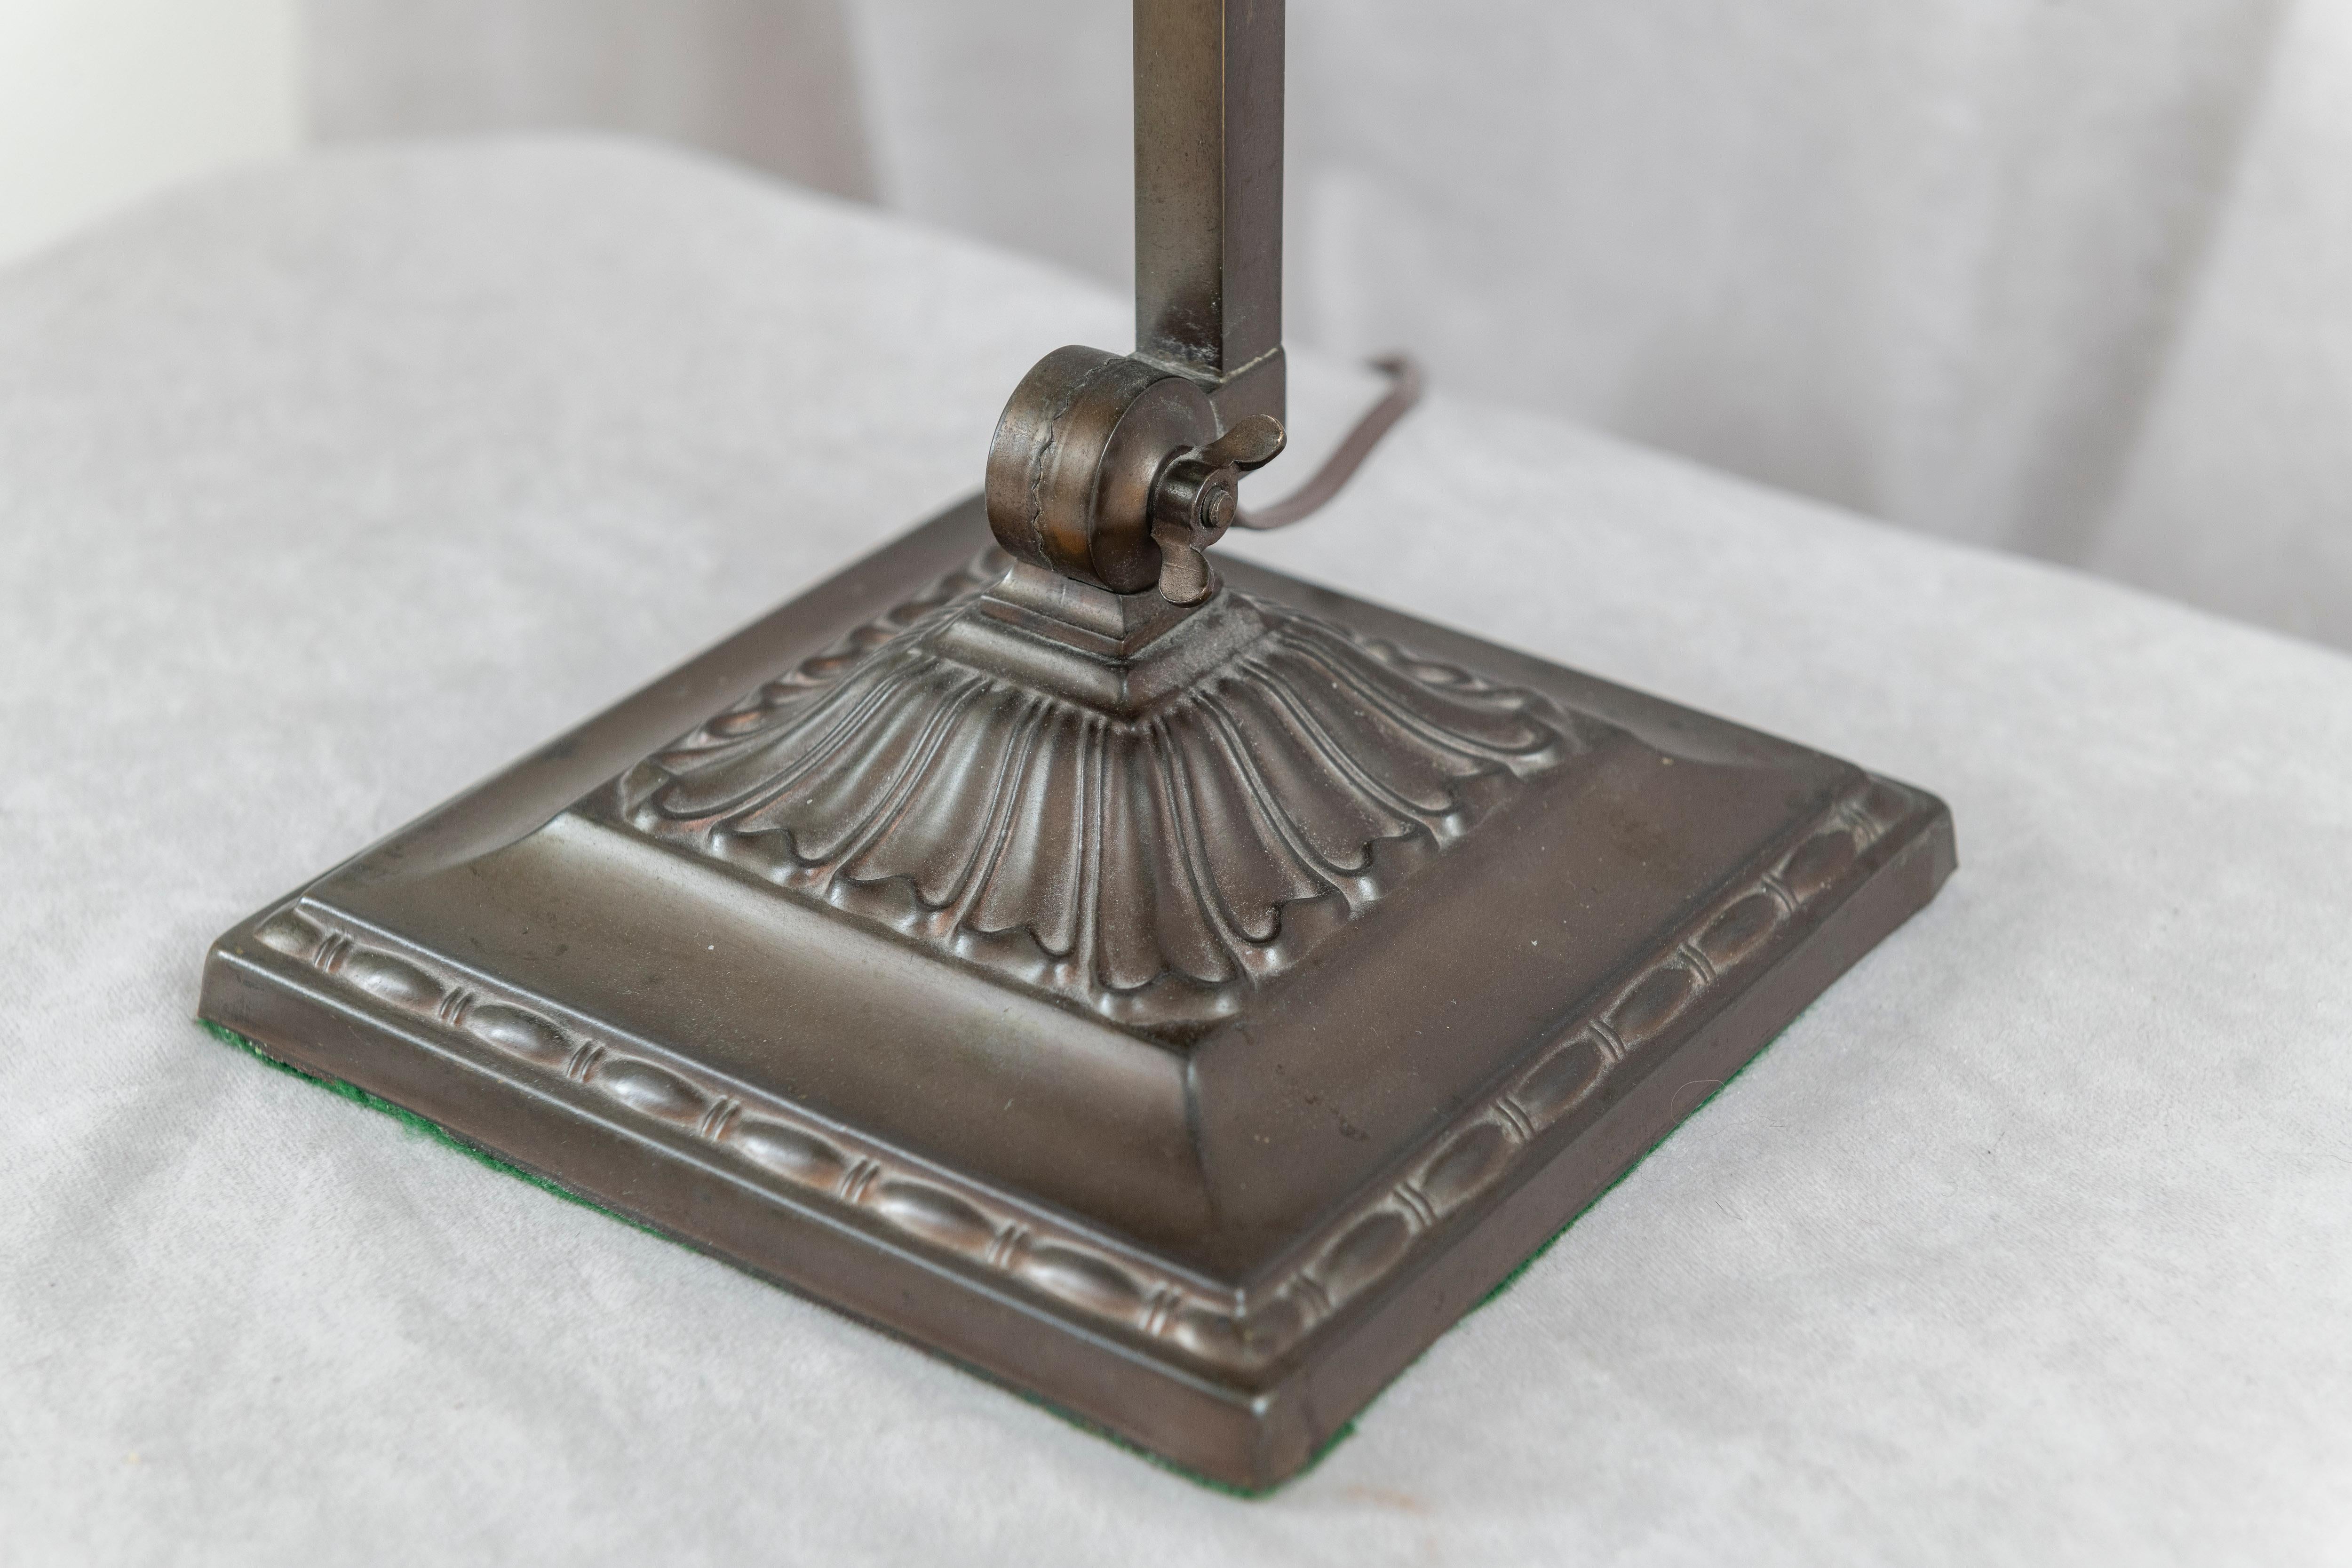 American Antique Banker's Desk Lamp by Emeralite, Original Green Shade, ca. 1917 For Sale